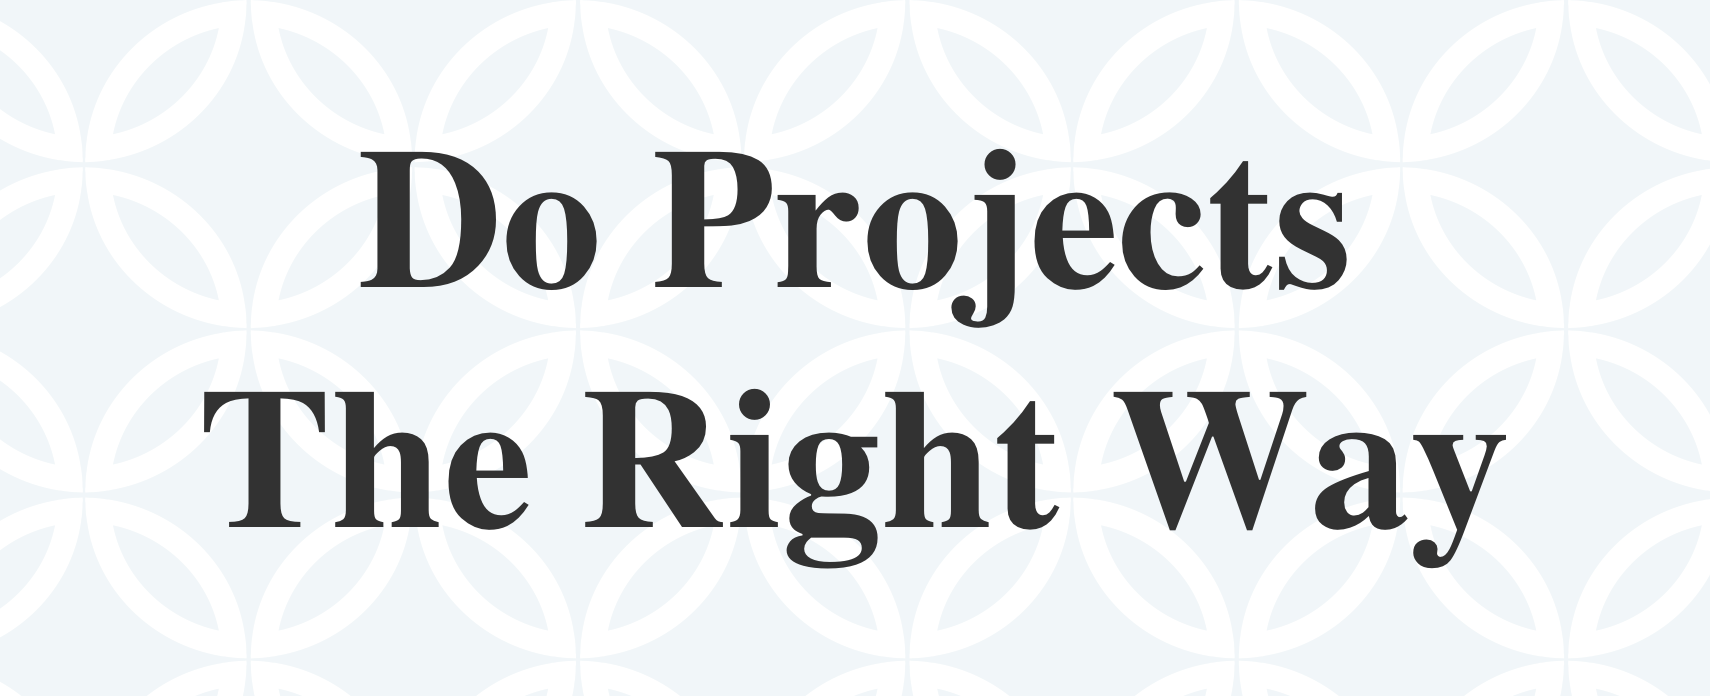 Do Projects The Right Way